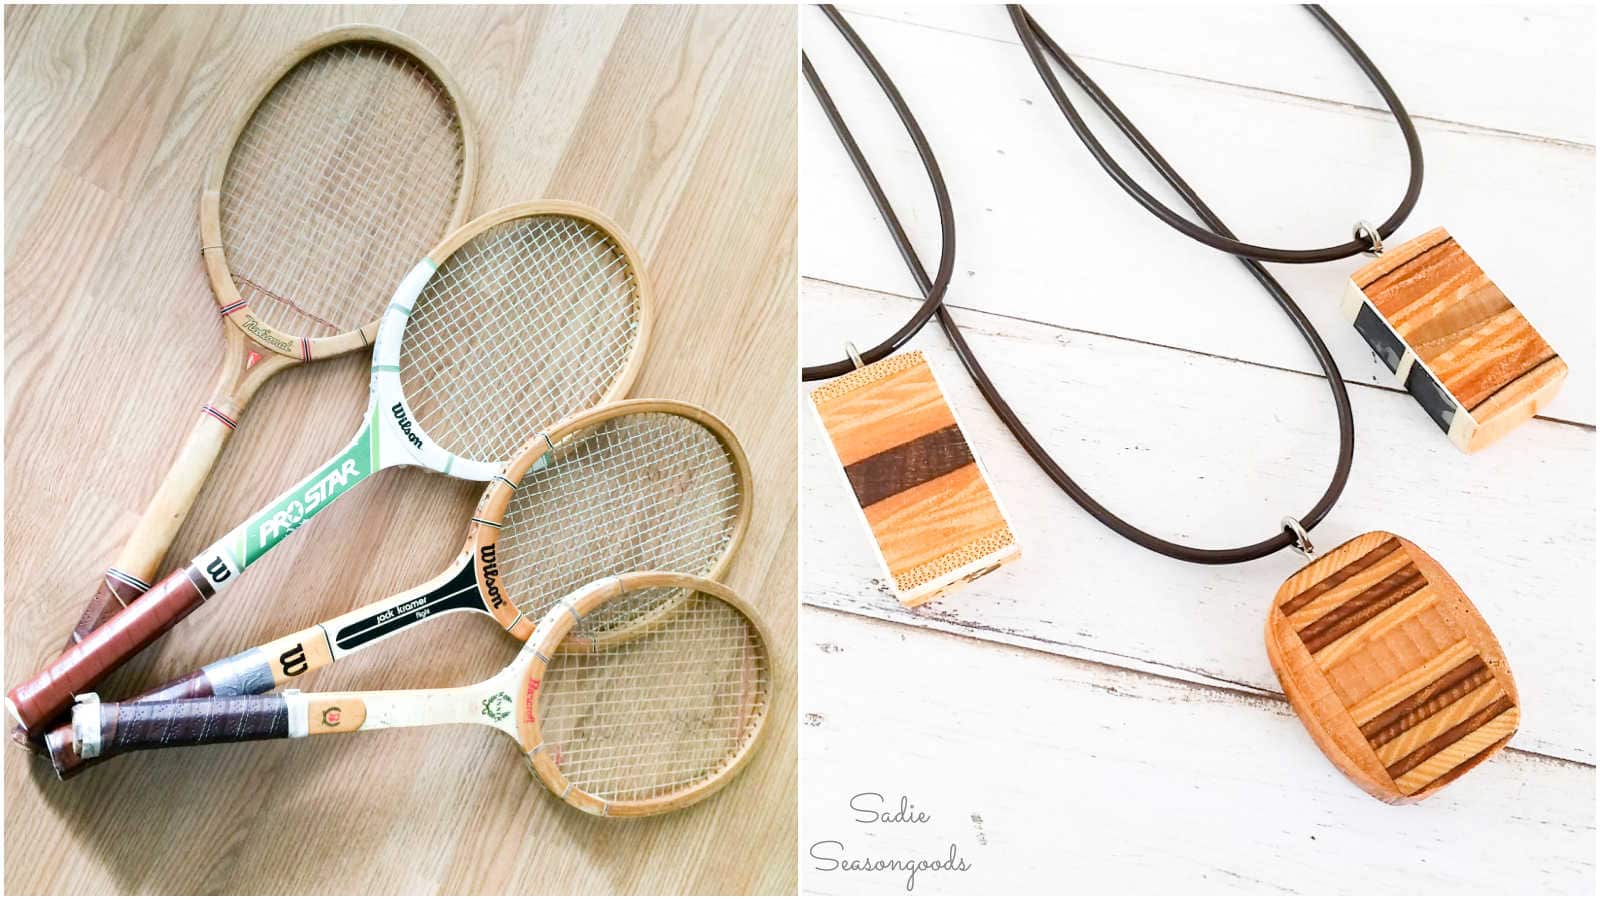 wooden pendants from tennis racket h andles